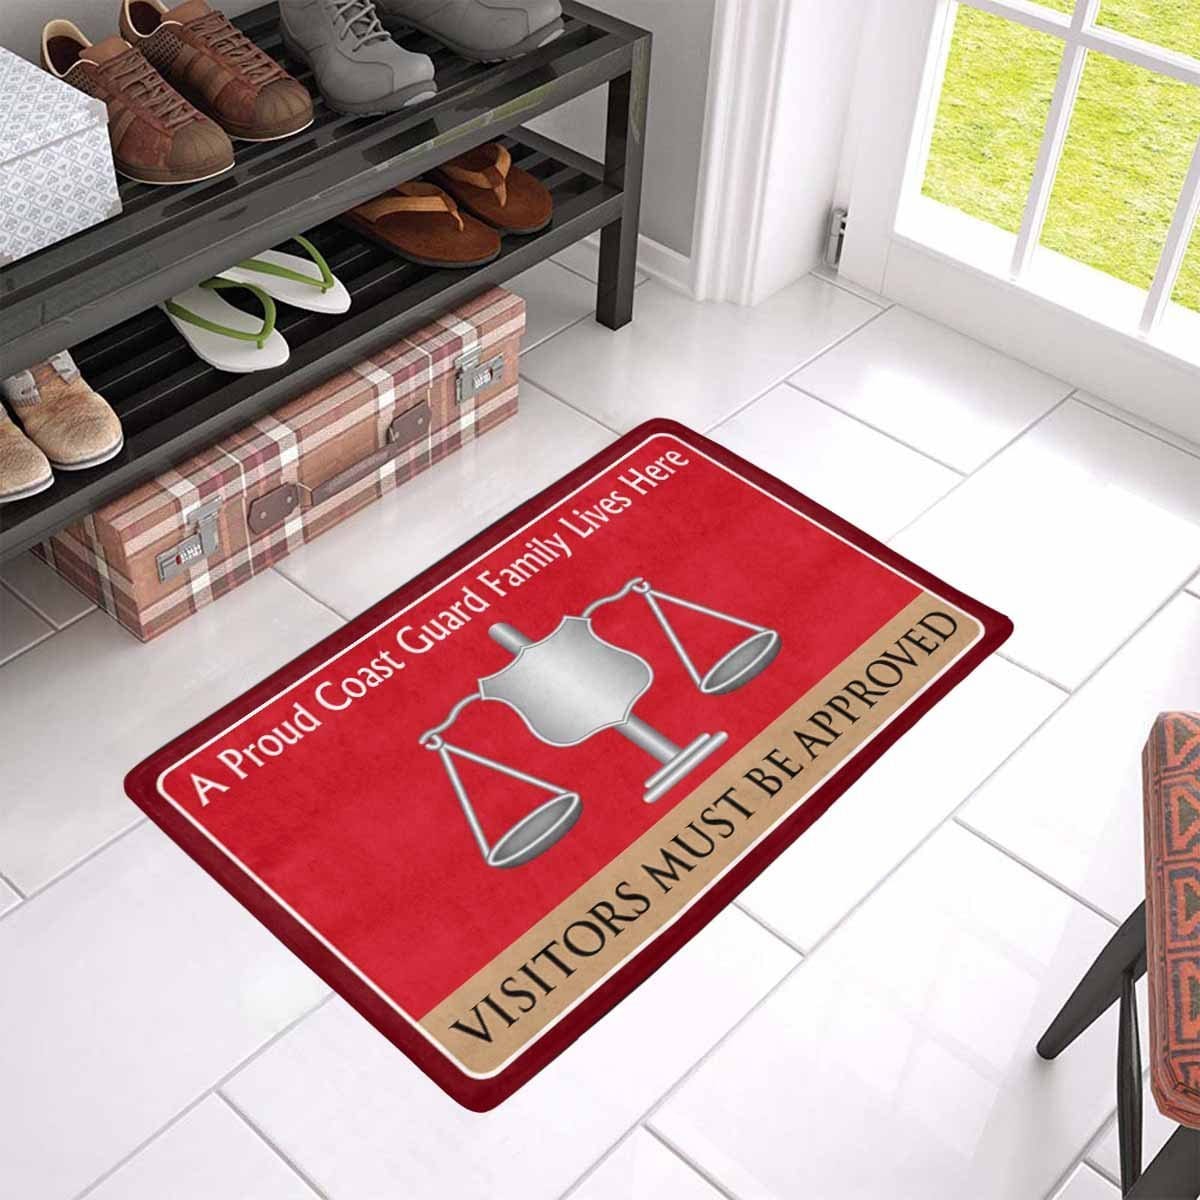 USCG INVESTIGATOR IV Logo Family Doormat - Visitors must be approved (23.6 inches x 15.7 inches)-Doormat-USCG-Rate-Veterans Nation